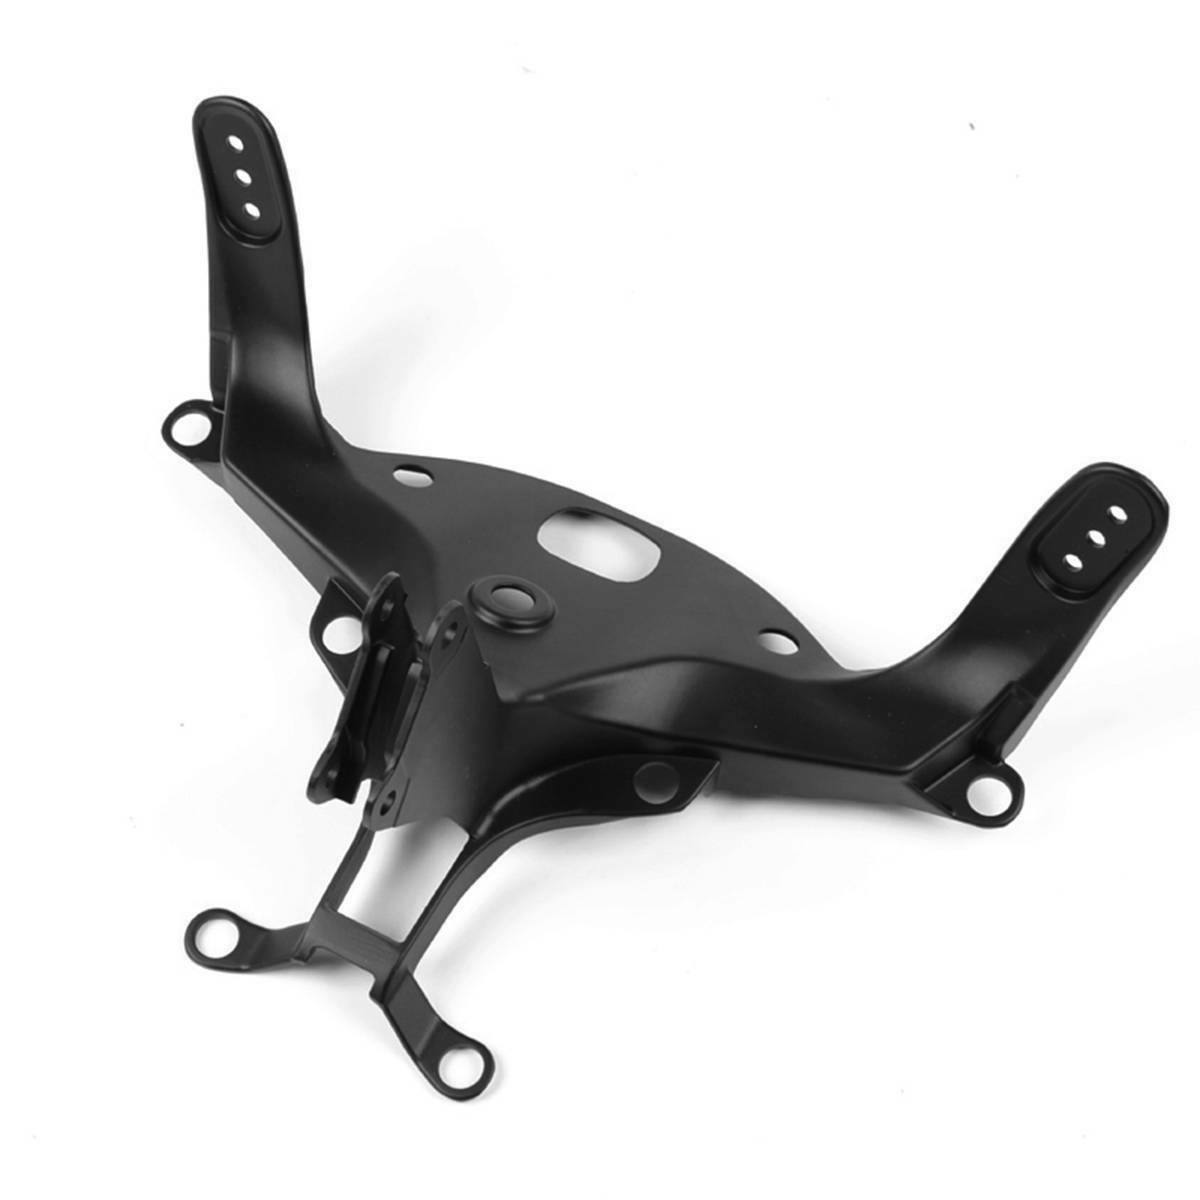 Upper Stay Fairing Headlight Bracket Fit For YAMAHA YZF R1 YZF-R1 04-06 Black US - Moto Life Products